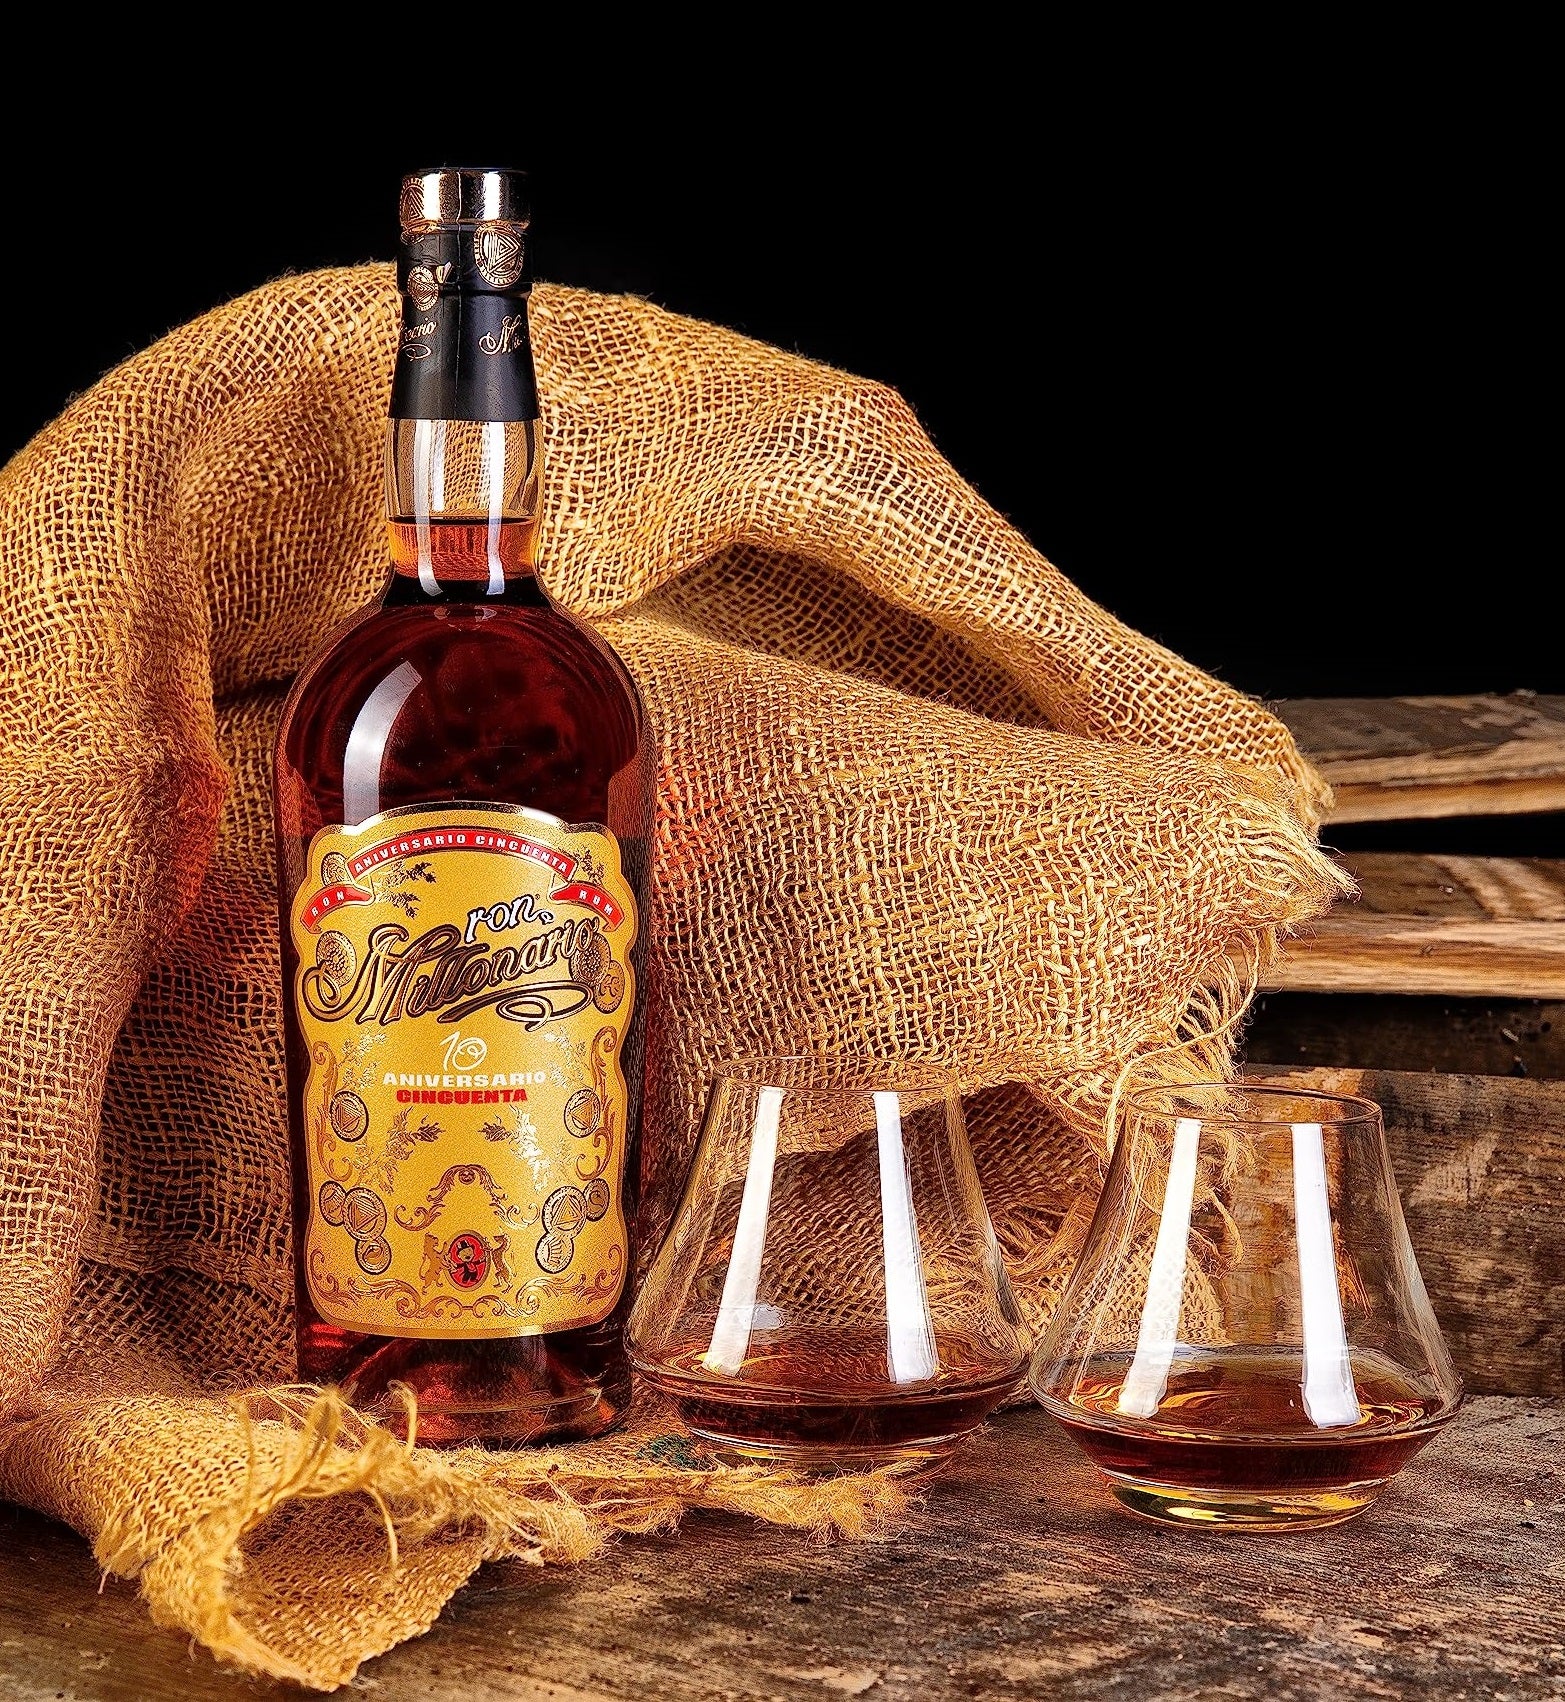 Experience intensified flavors with the 10 Aniversario Reserva